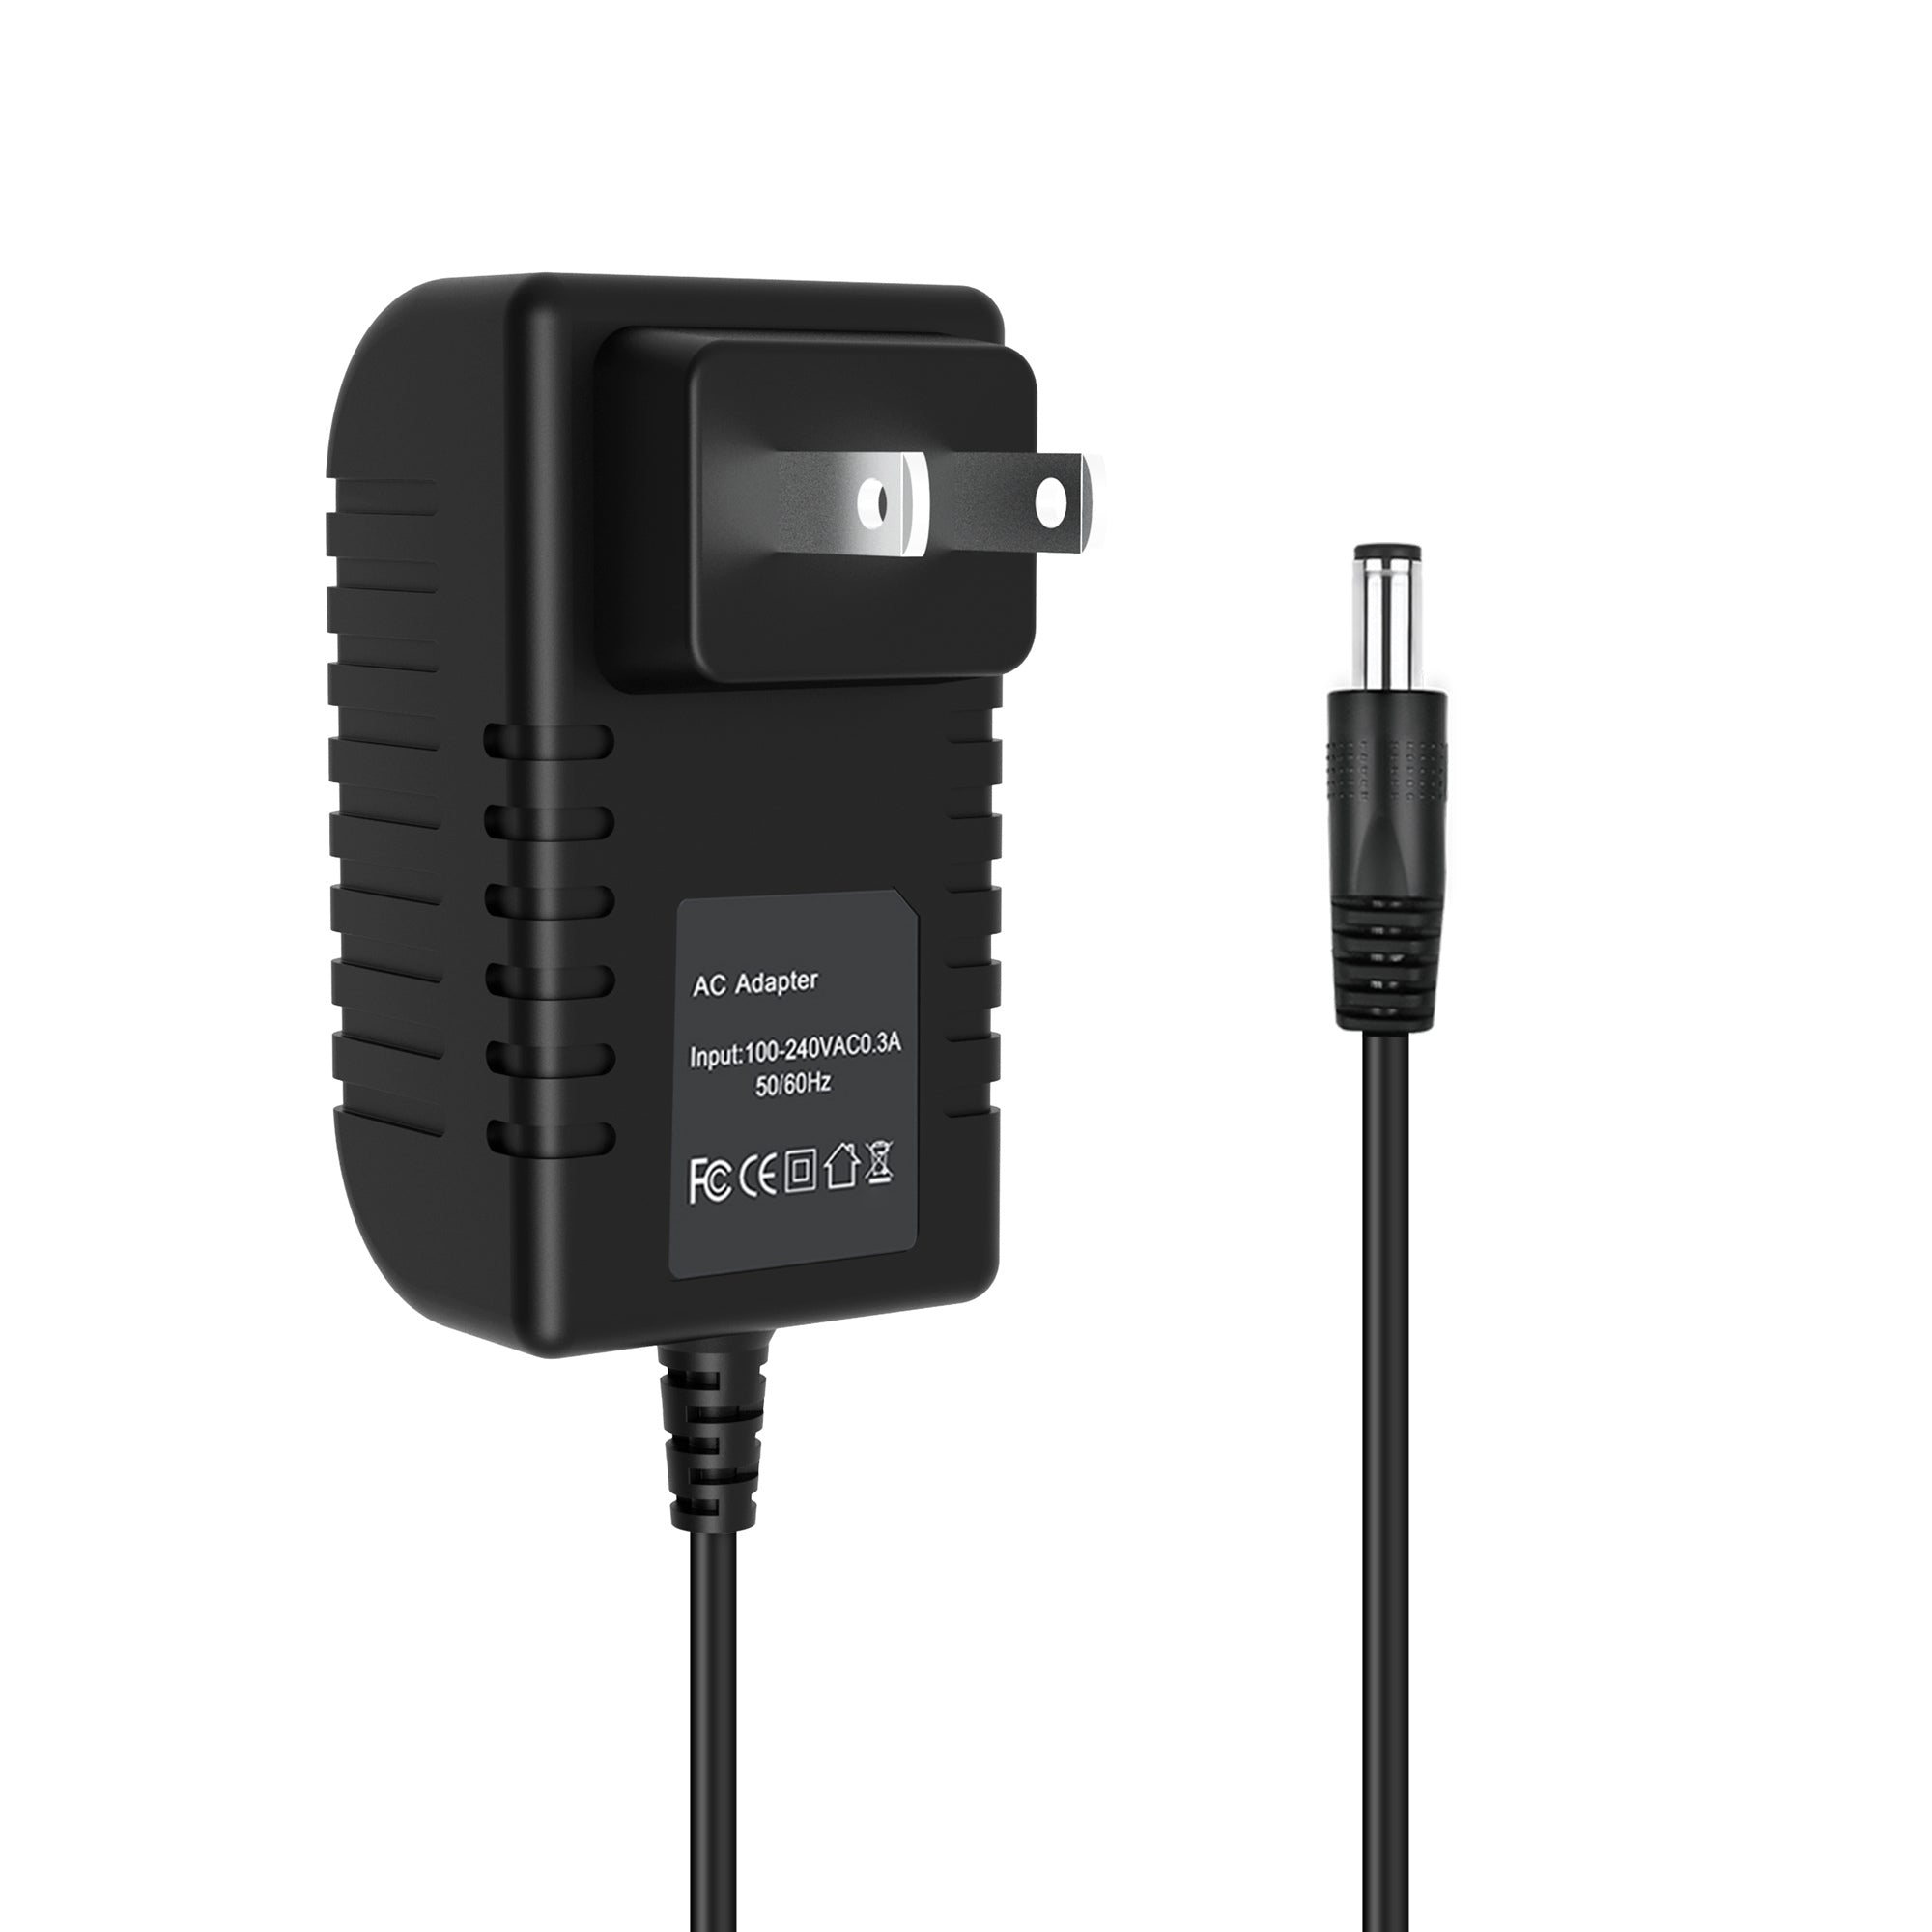 AbleGrid AC/DC Adapter Compatible with 2Wire 1000-500031-00 0 GPUSW0512000GD 1S Power Supply Cord Cable PS Wall Home Charger Input: 100 - 240 VAC 50/60Hz Worldwide Voltage Use Mains PSU